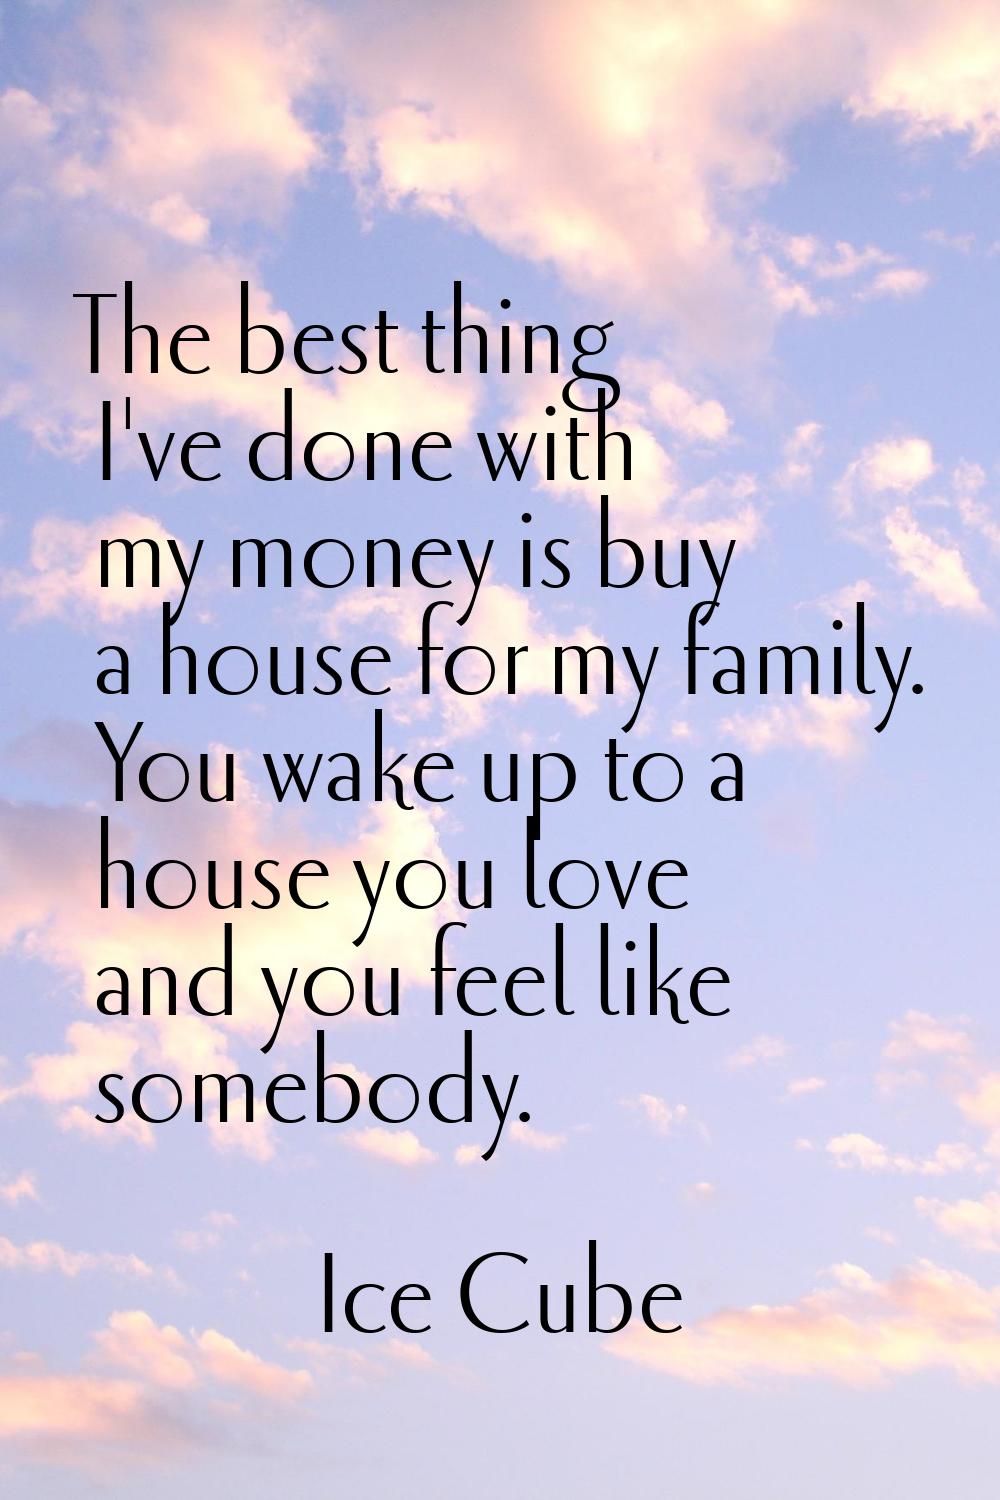 The best thing I've done with my money is buy a house for my family. You wake up to a house you lov